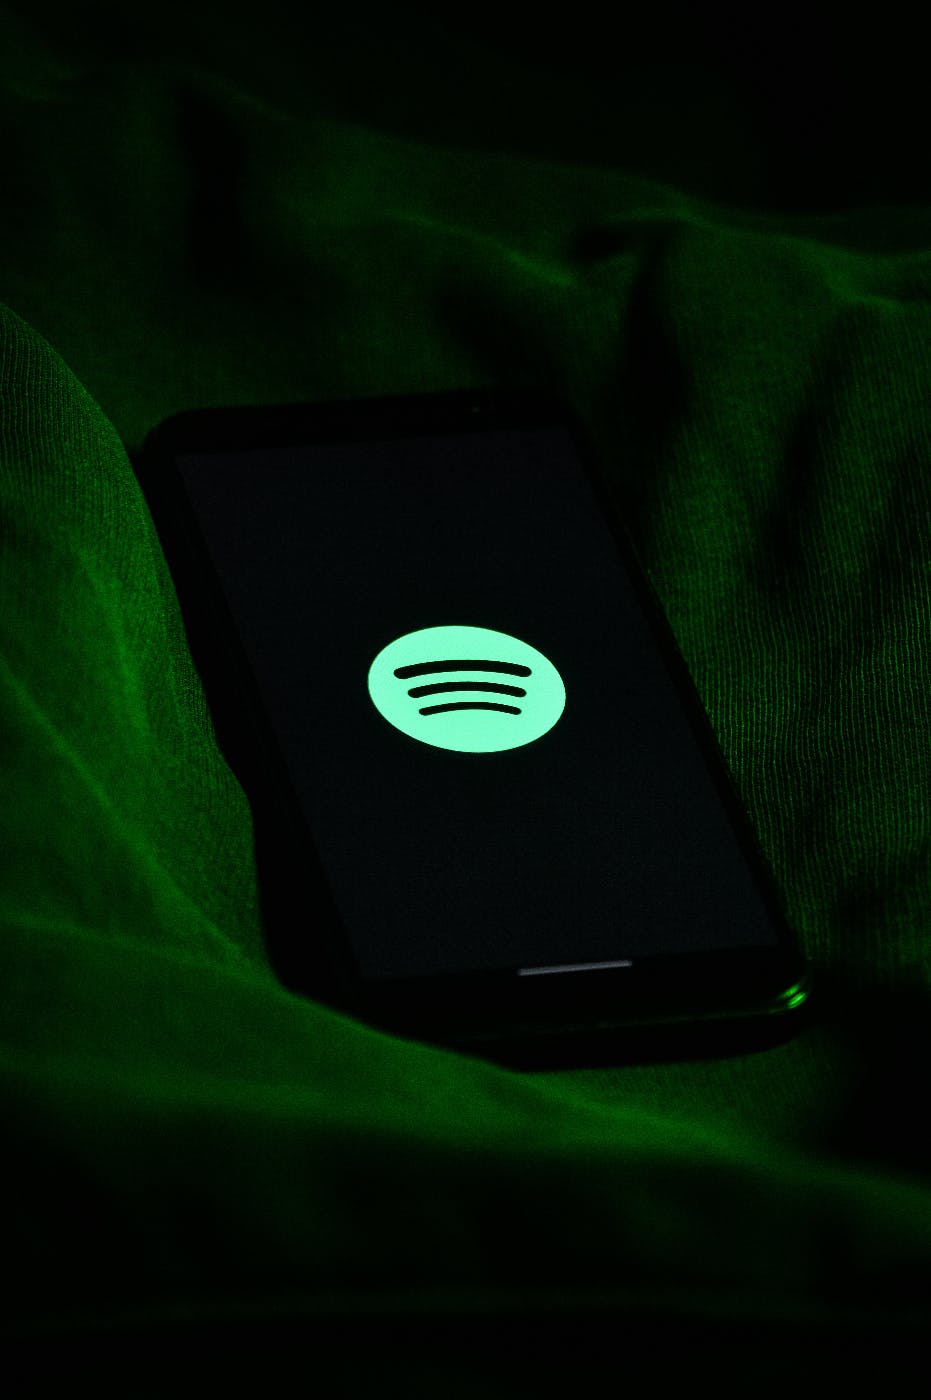 The Spotify emblem on a smartphone glowing in the dark